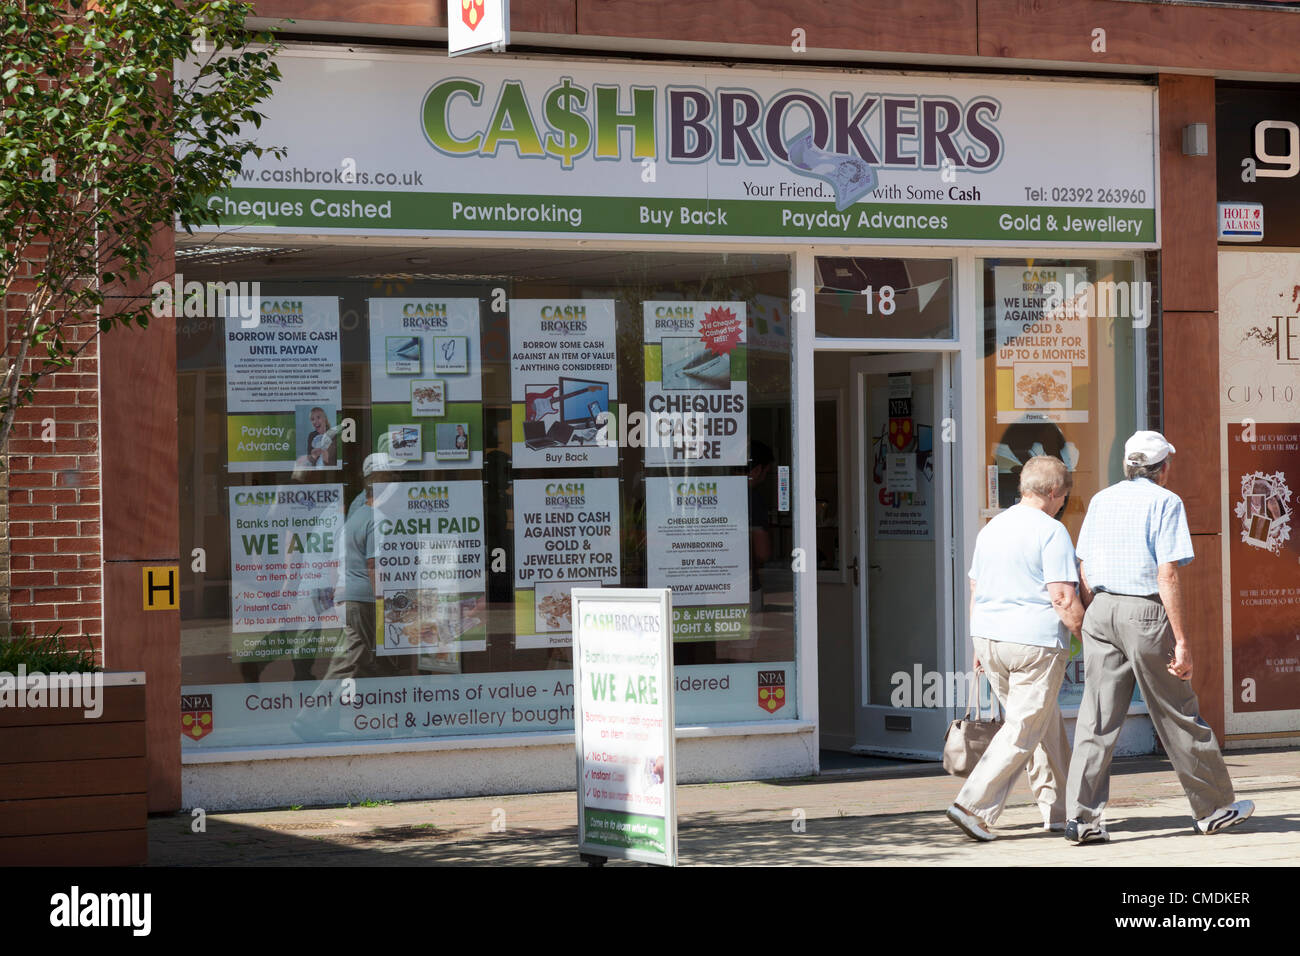 England 25 July 2012. recession hit high street discounts and closures. Pawn brokers and cash converters still there. Stock Photo